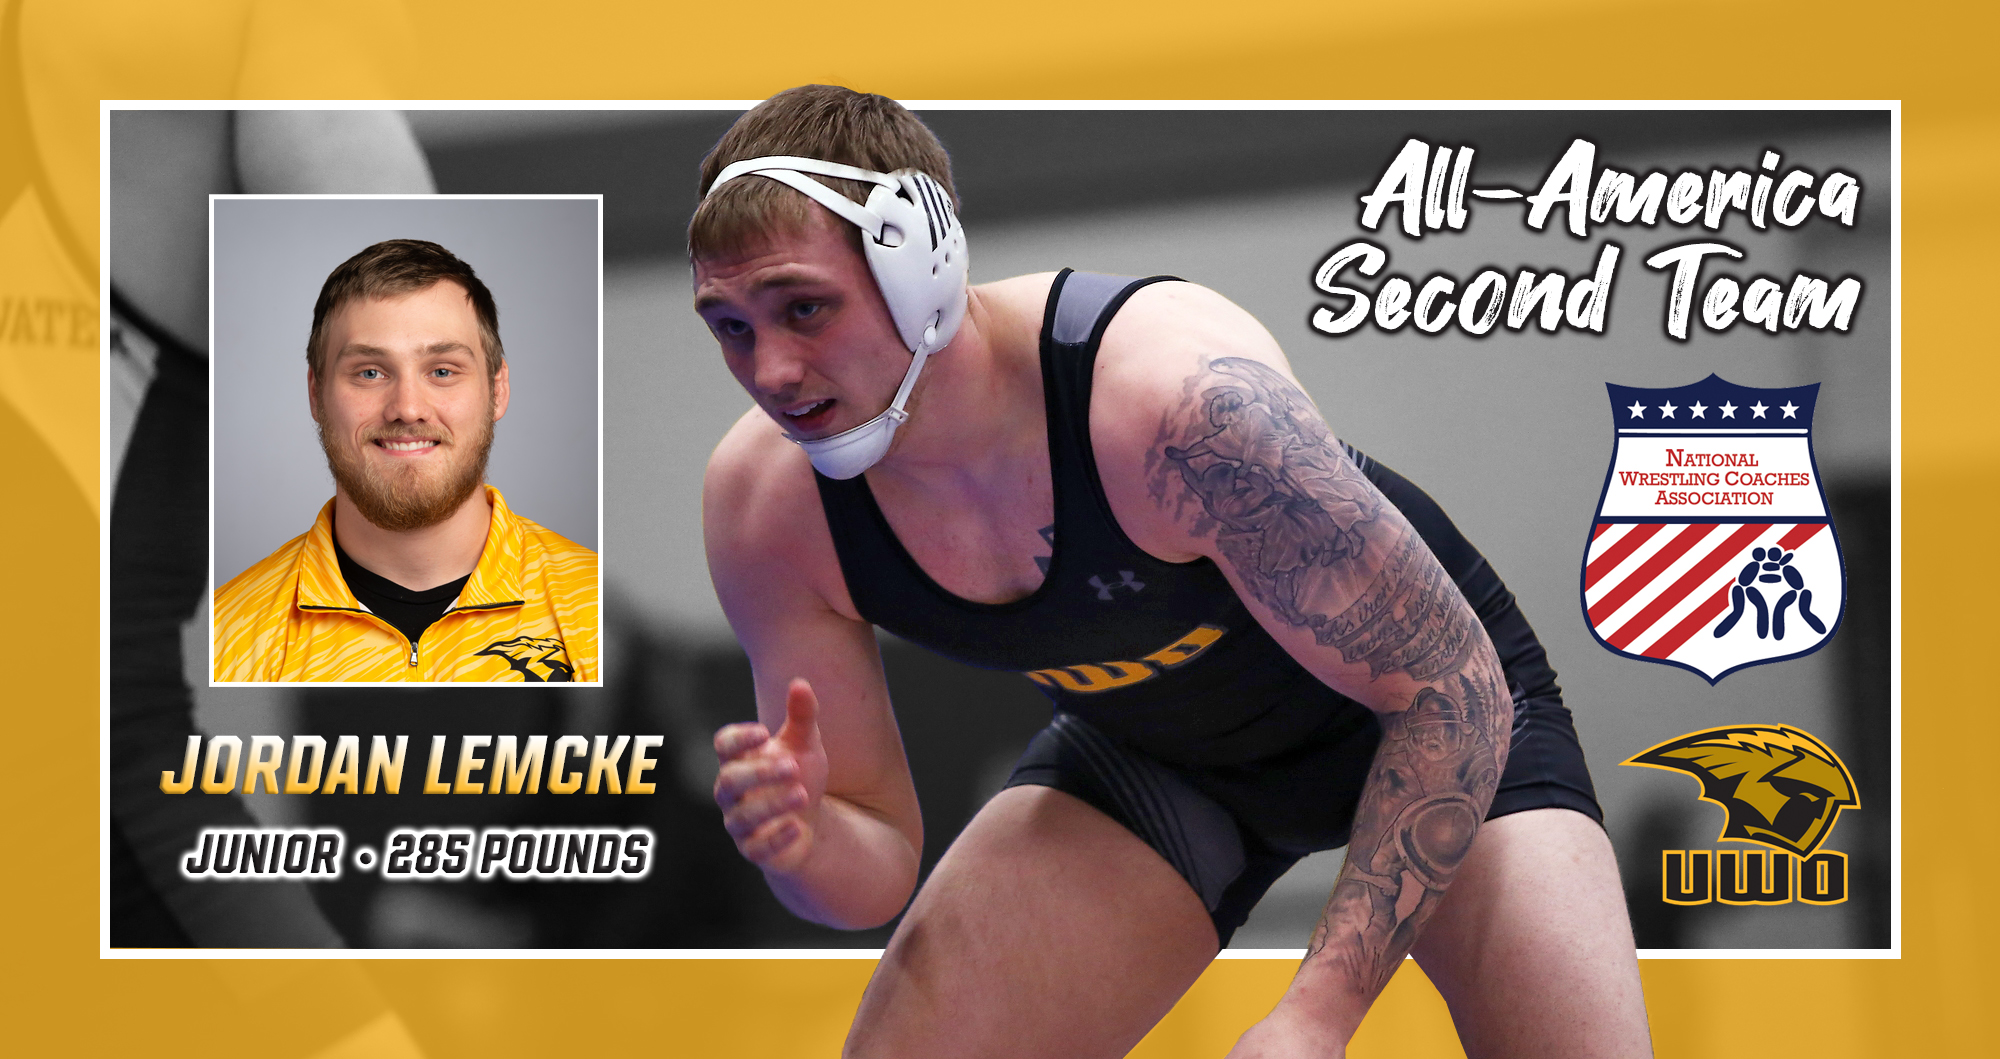 Lemcke Selected To All-America Second Team